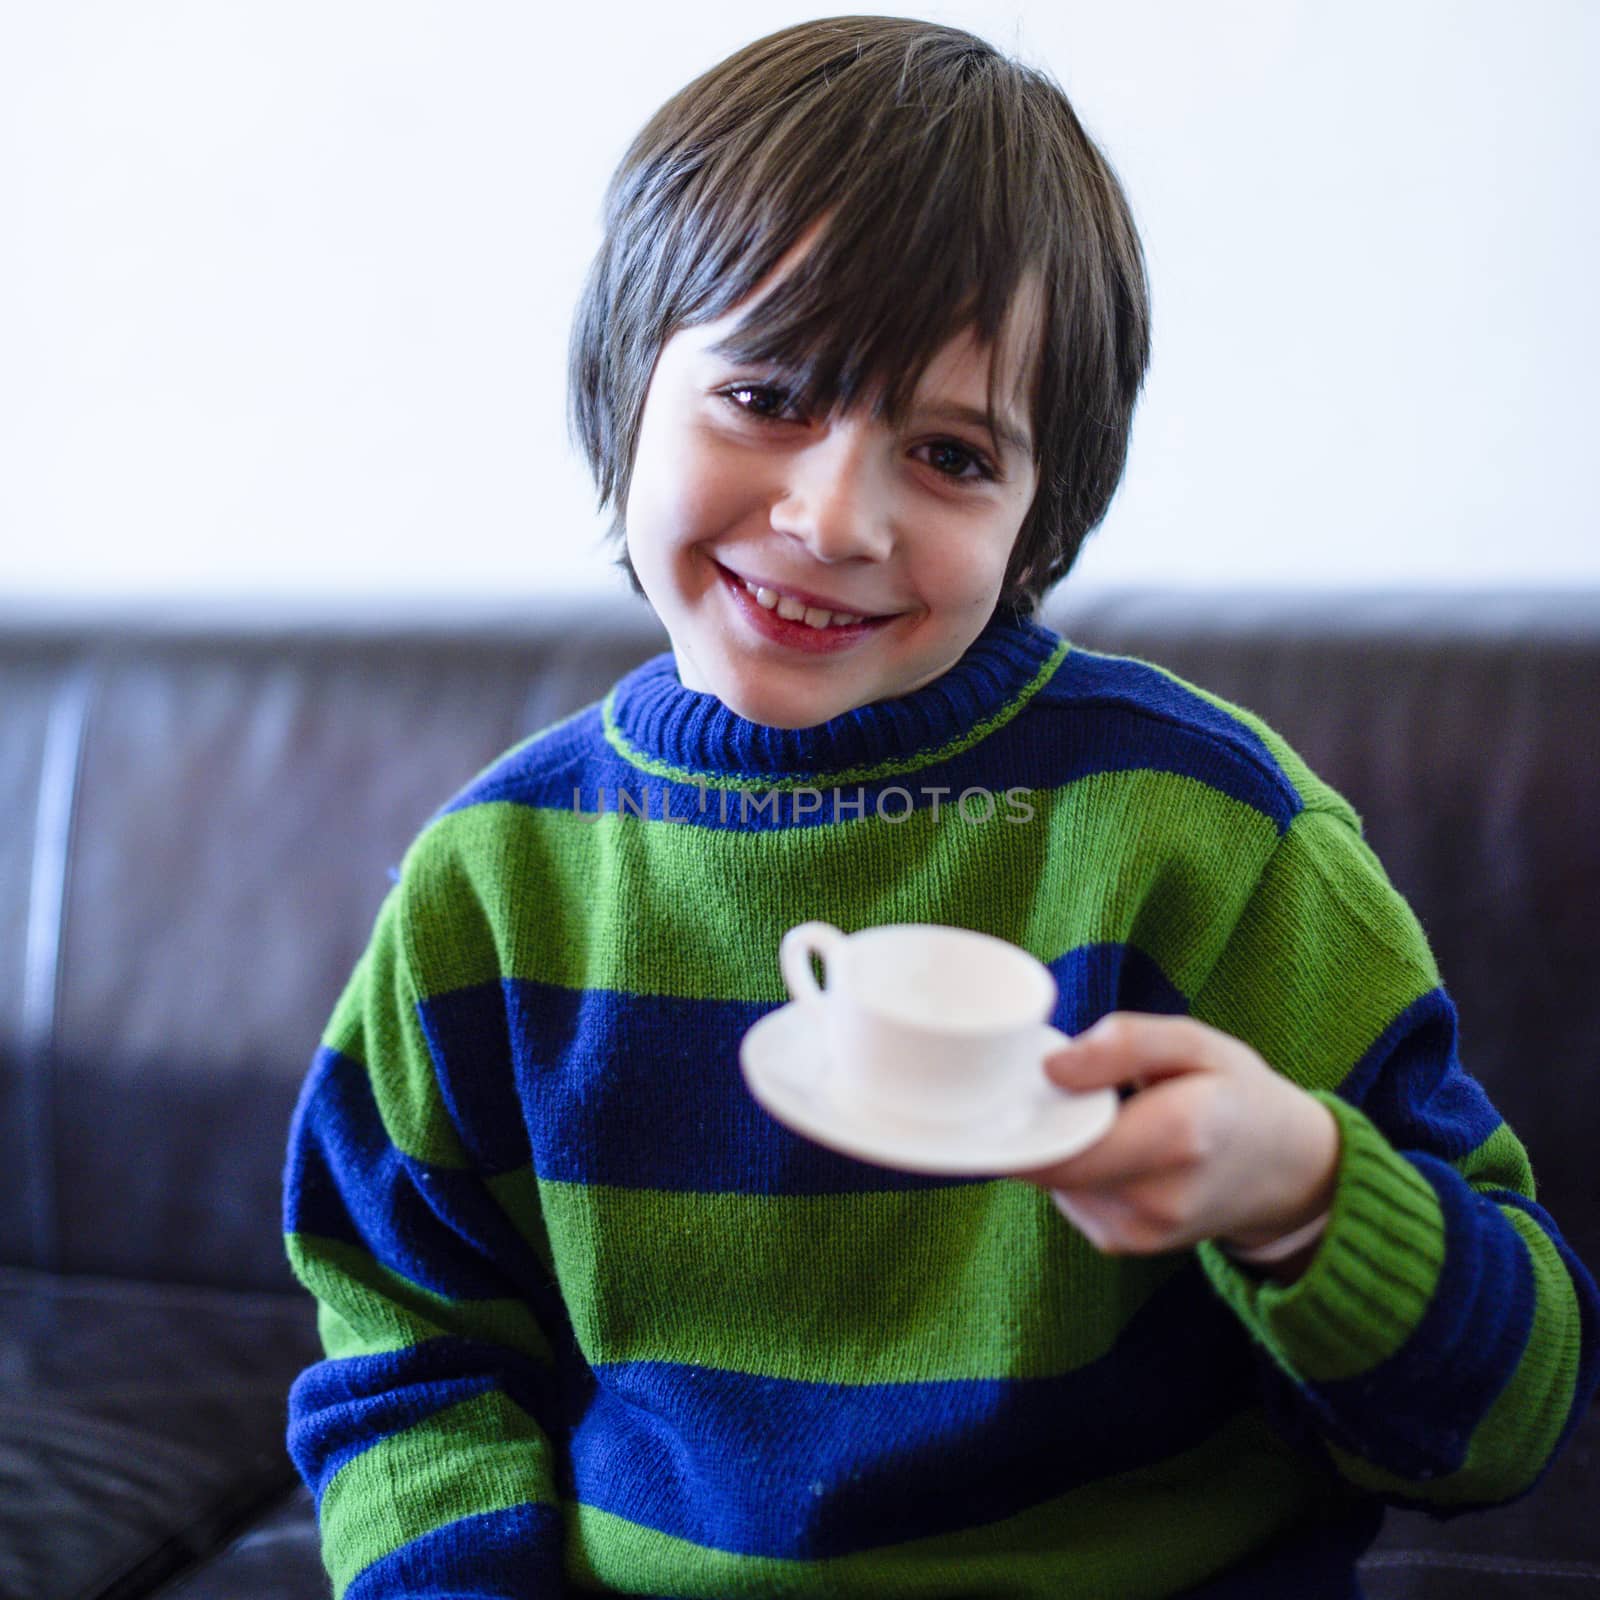 child plays, drinking tea on the sofa at home, lit by the window